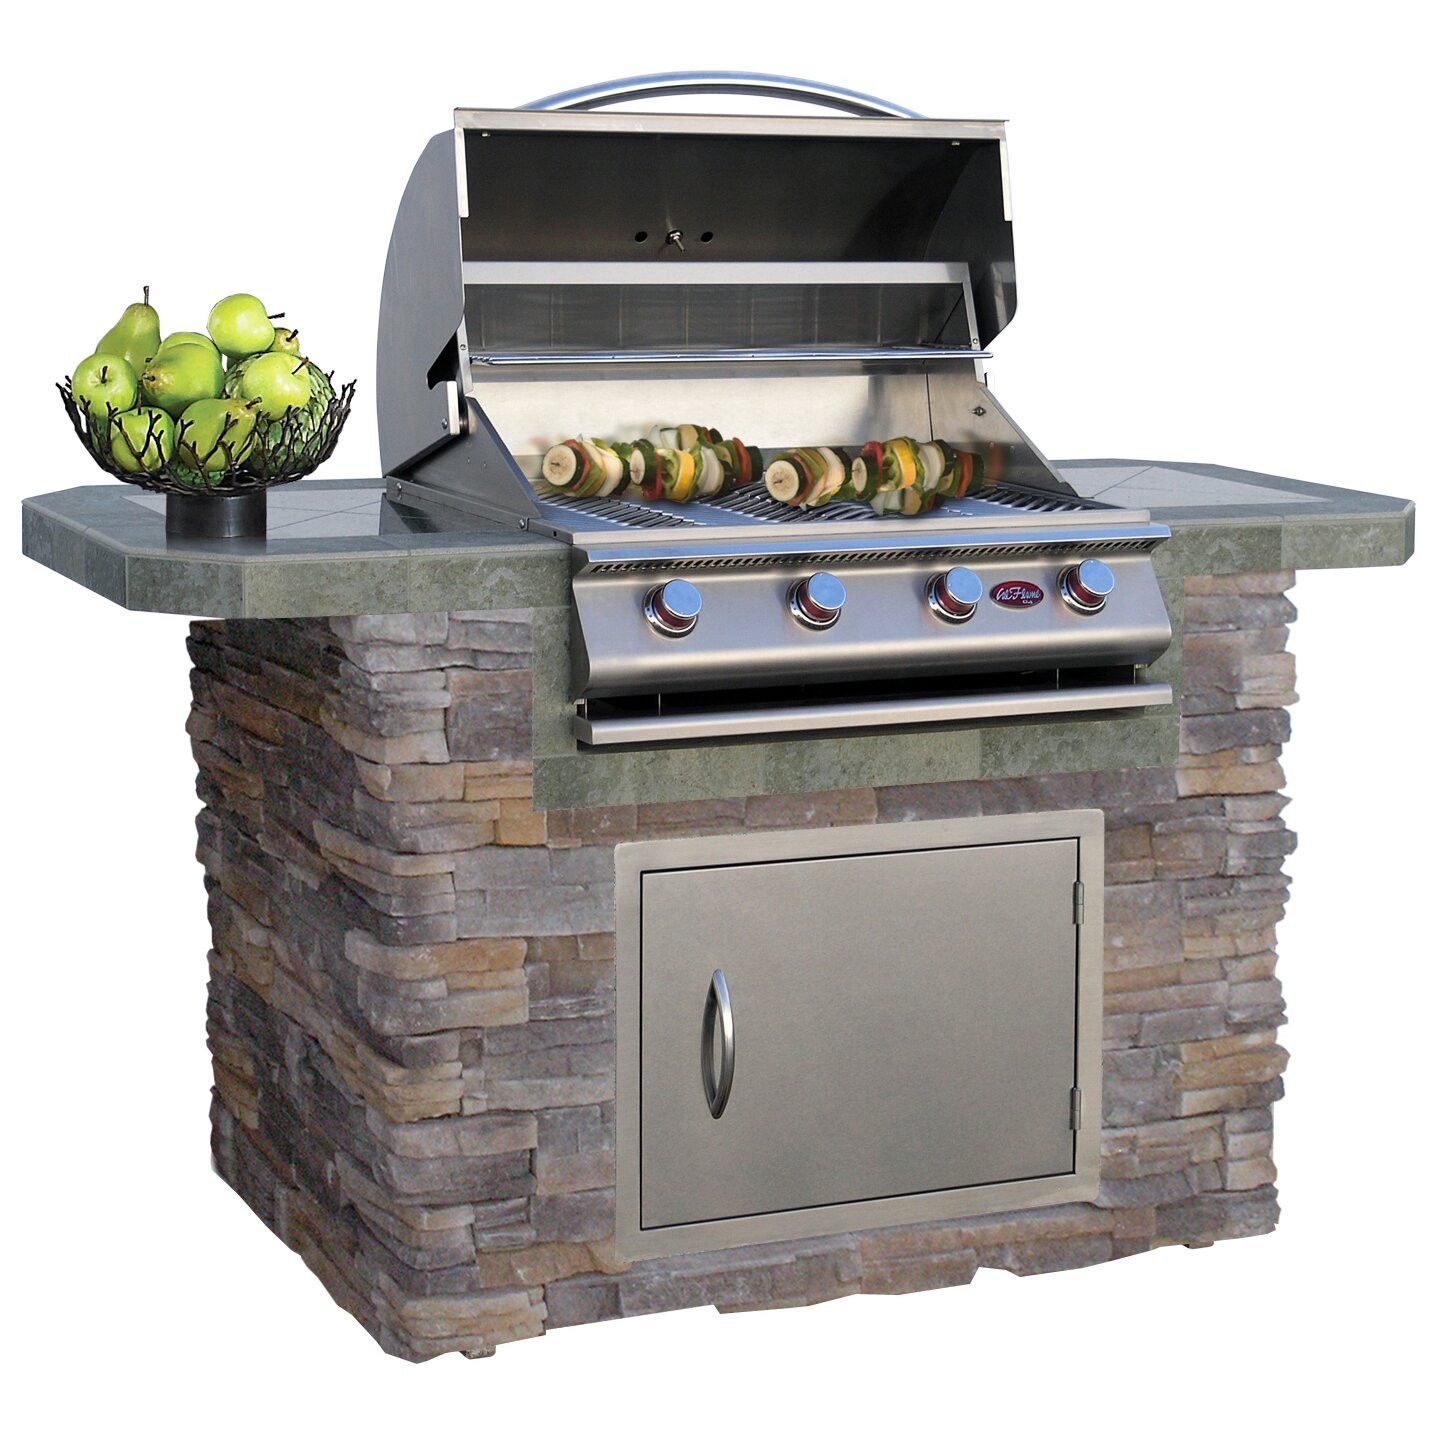 Gas Grill For Outdoor Kitchen
 CalFlame 72" 4 Burner Liquid Propane Gas Grill